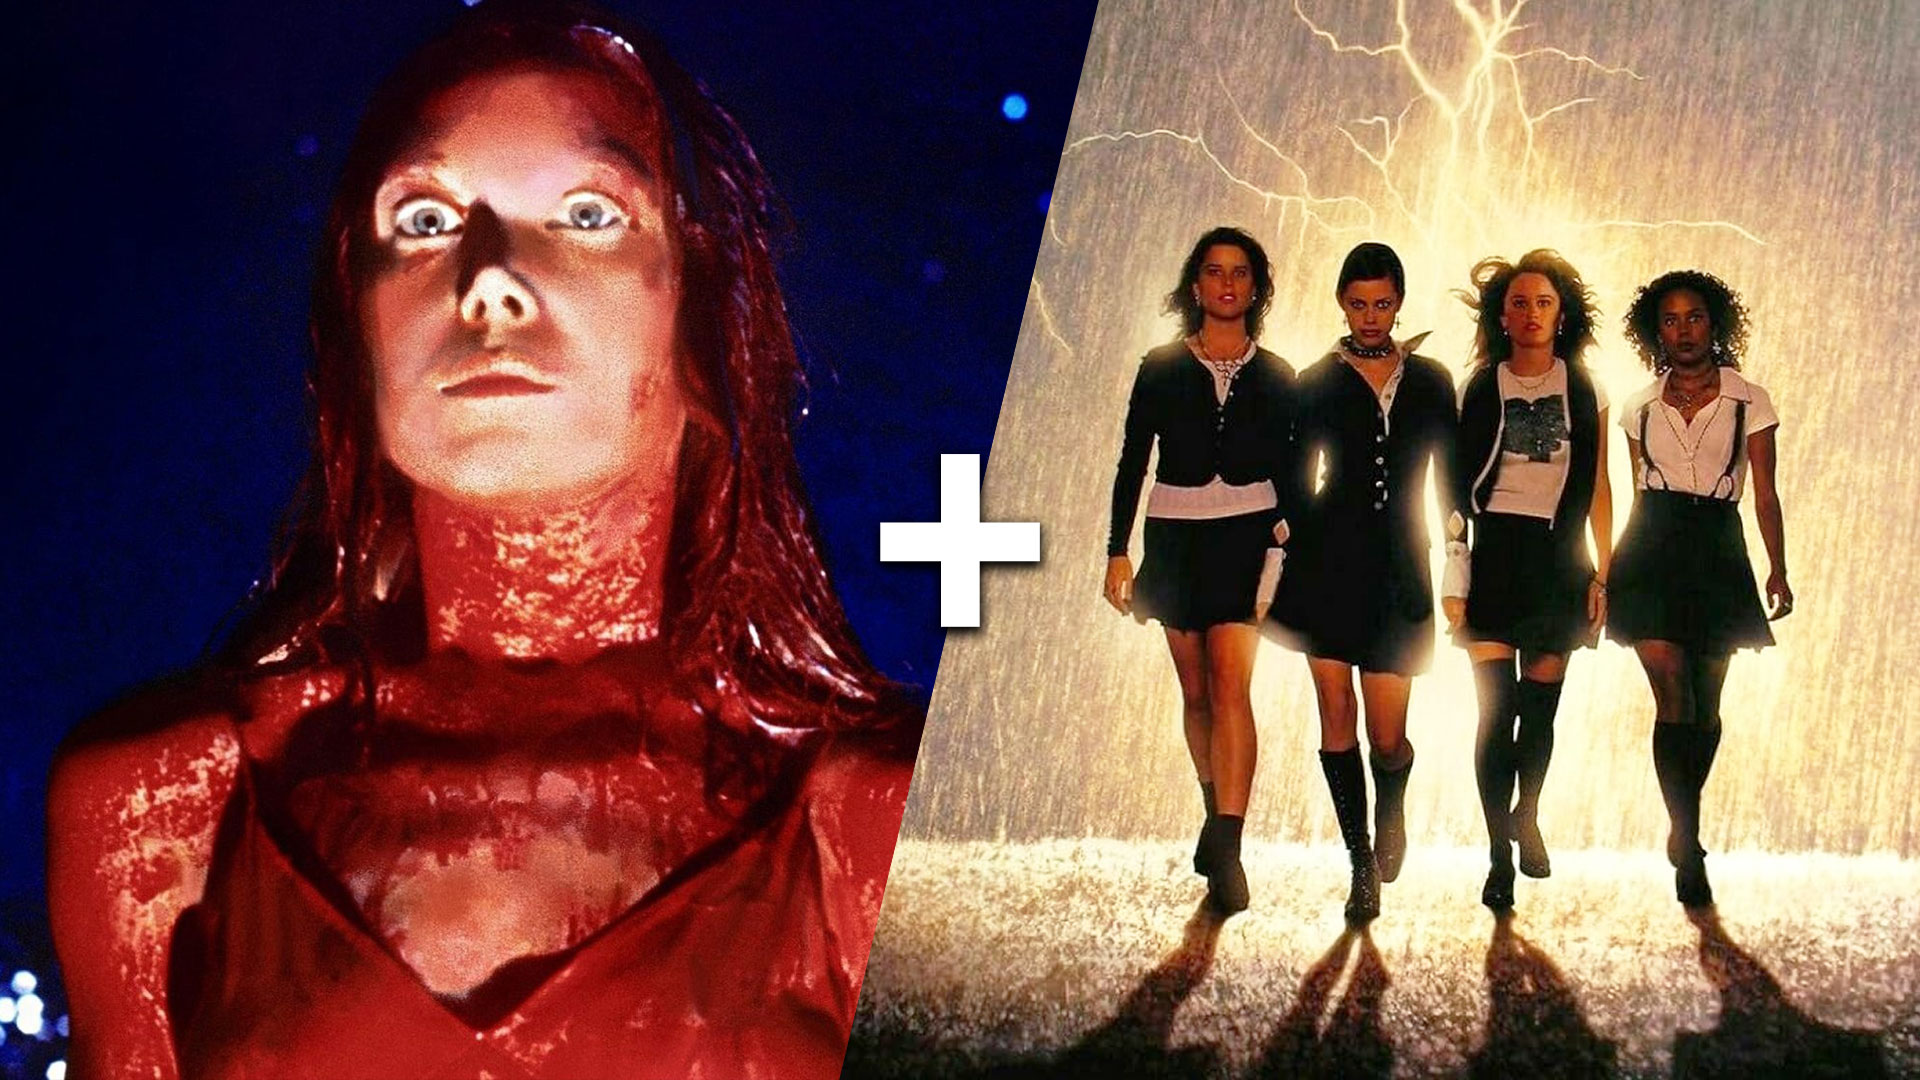 Carrie + The Craft